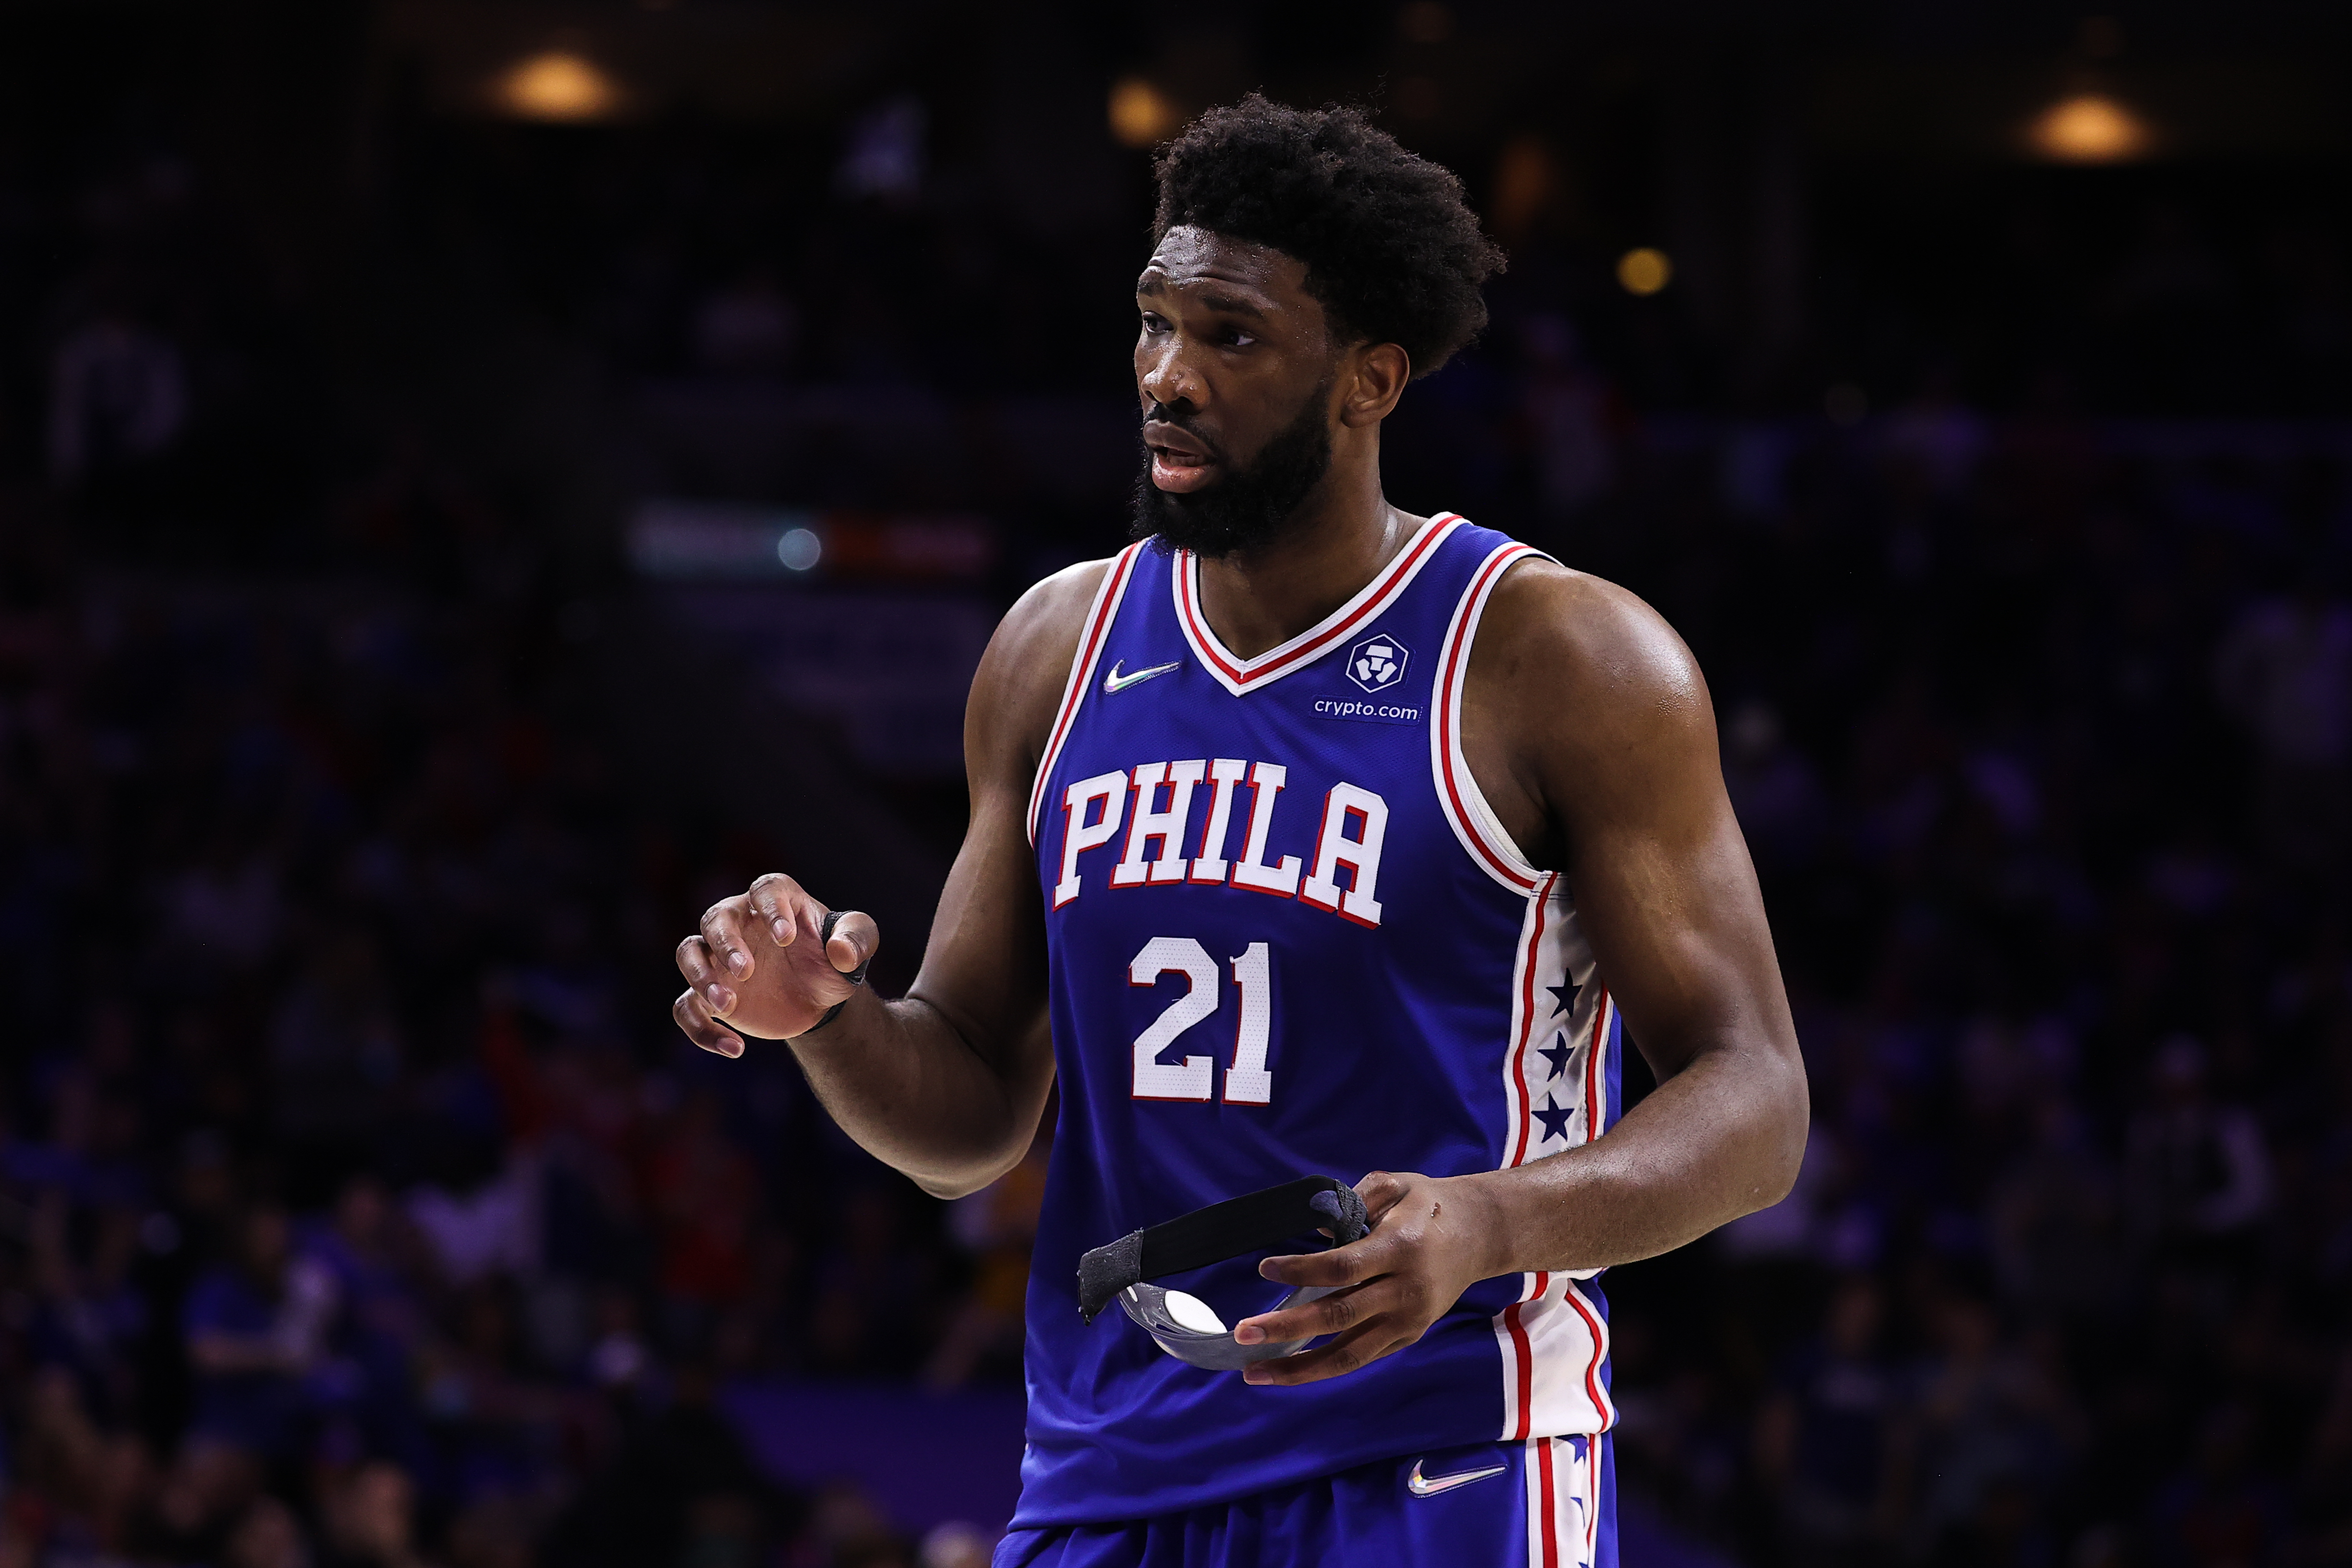 PRESEASON GAME #3 - Nets face 76ers with Joel Embiid but without